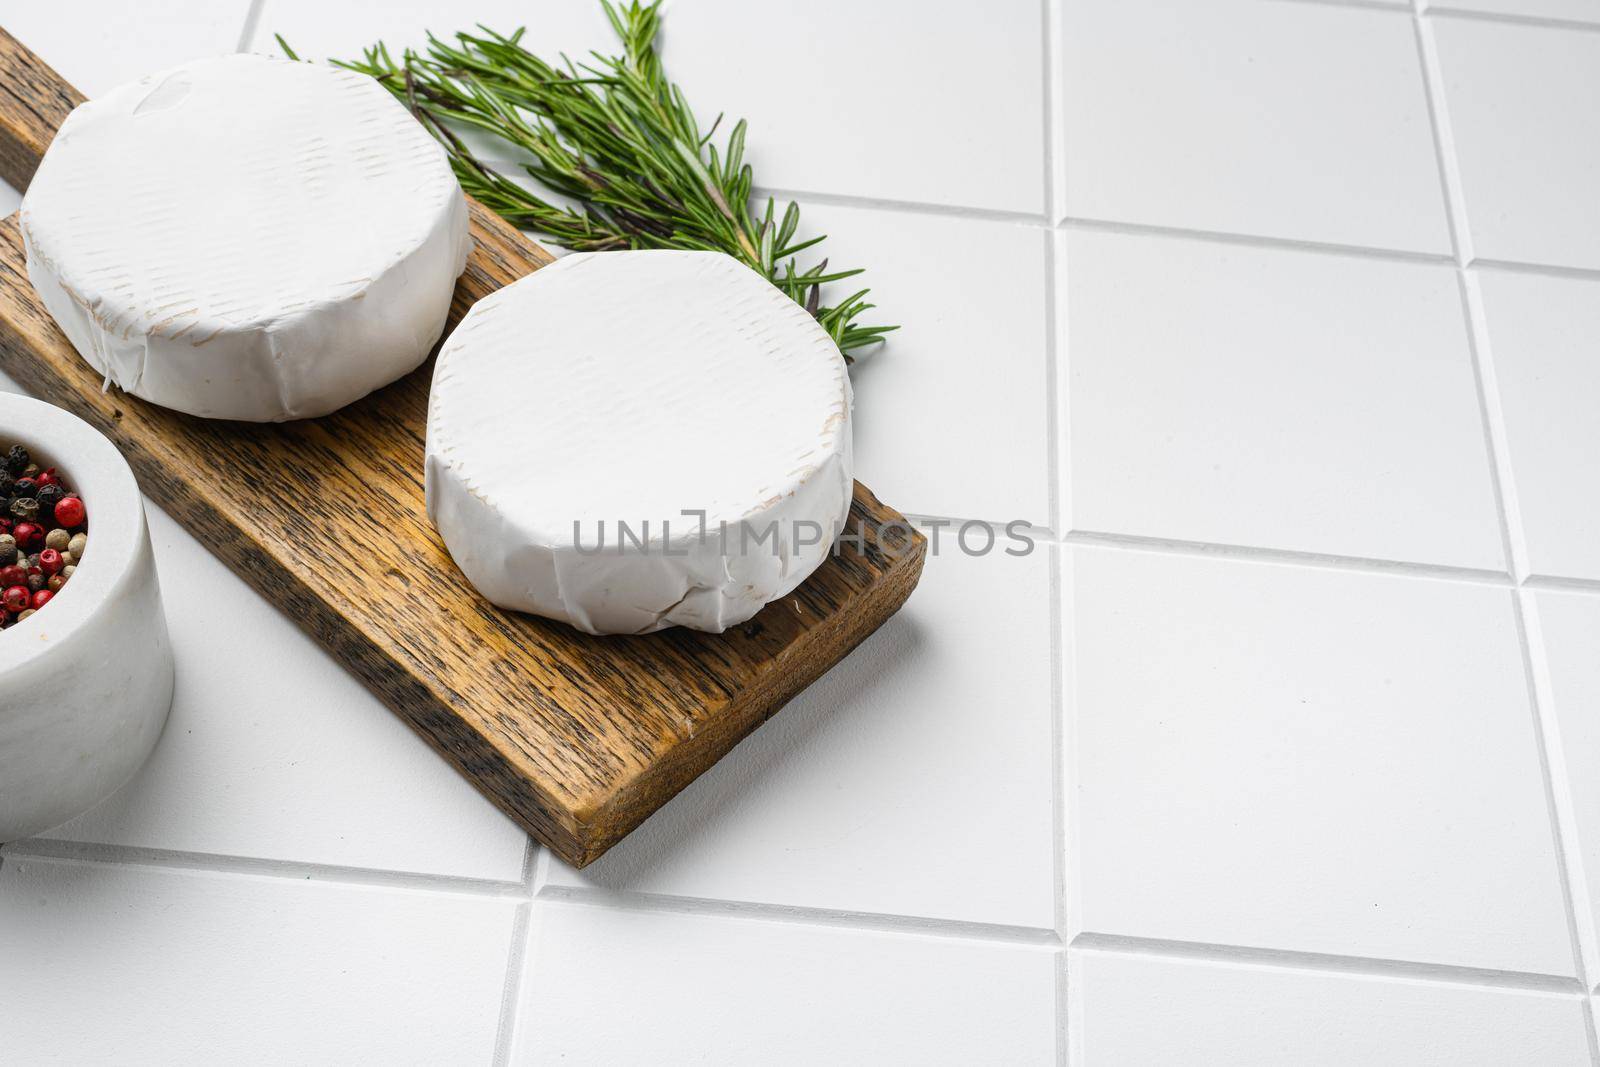 Creamy Brie cheese, on white ceramic squared tile table background, with copy space for text